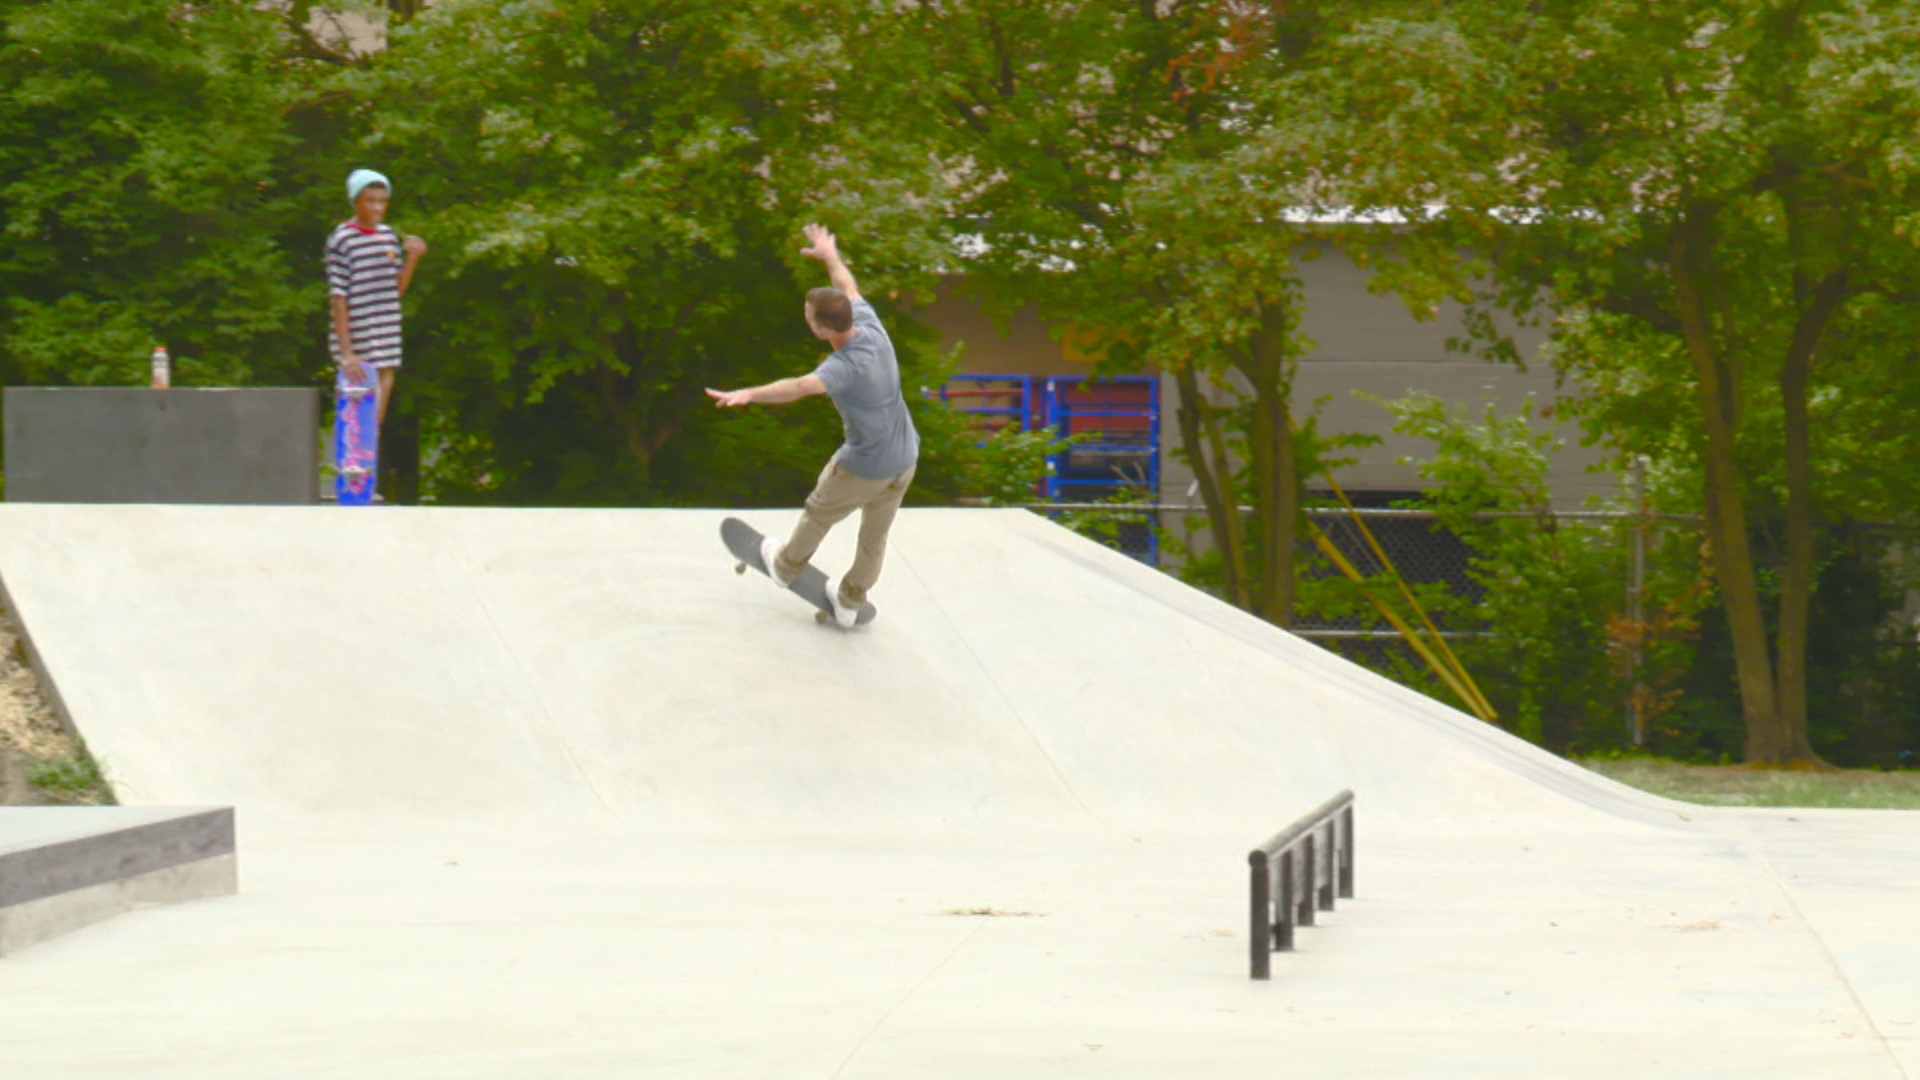 Indianapolis opens new skate park with a lifted legacy